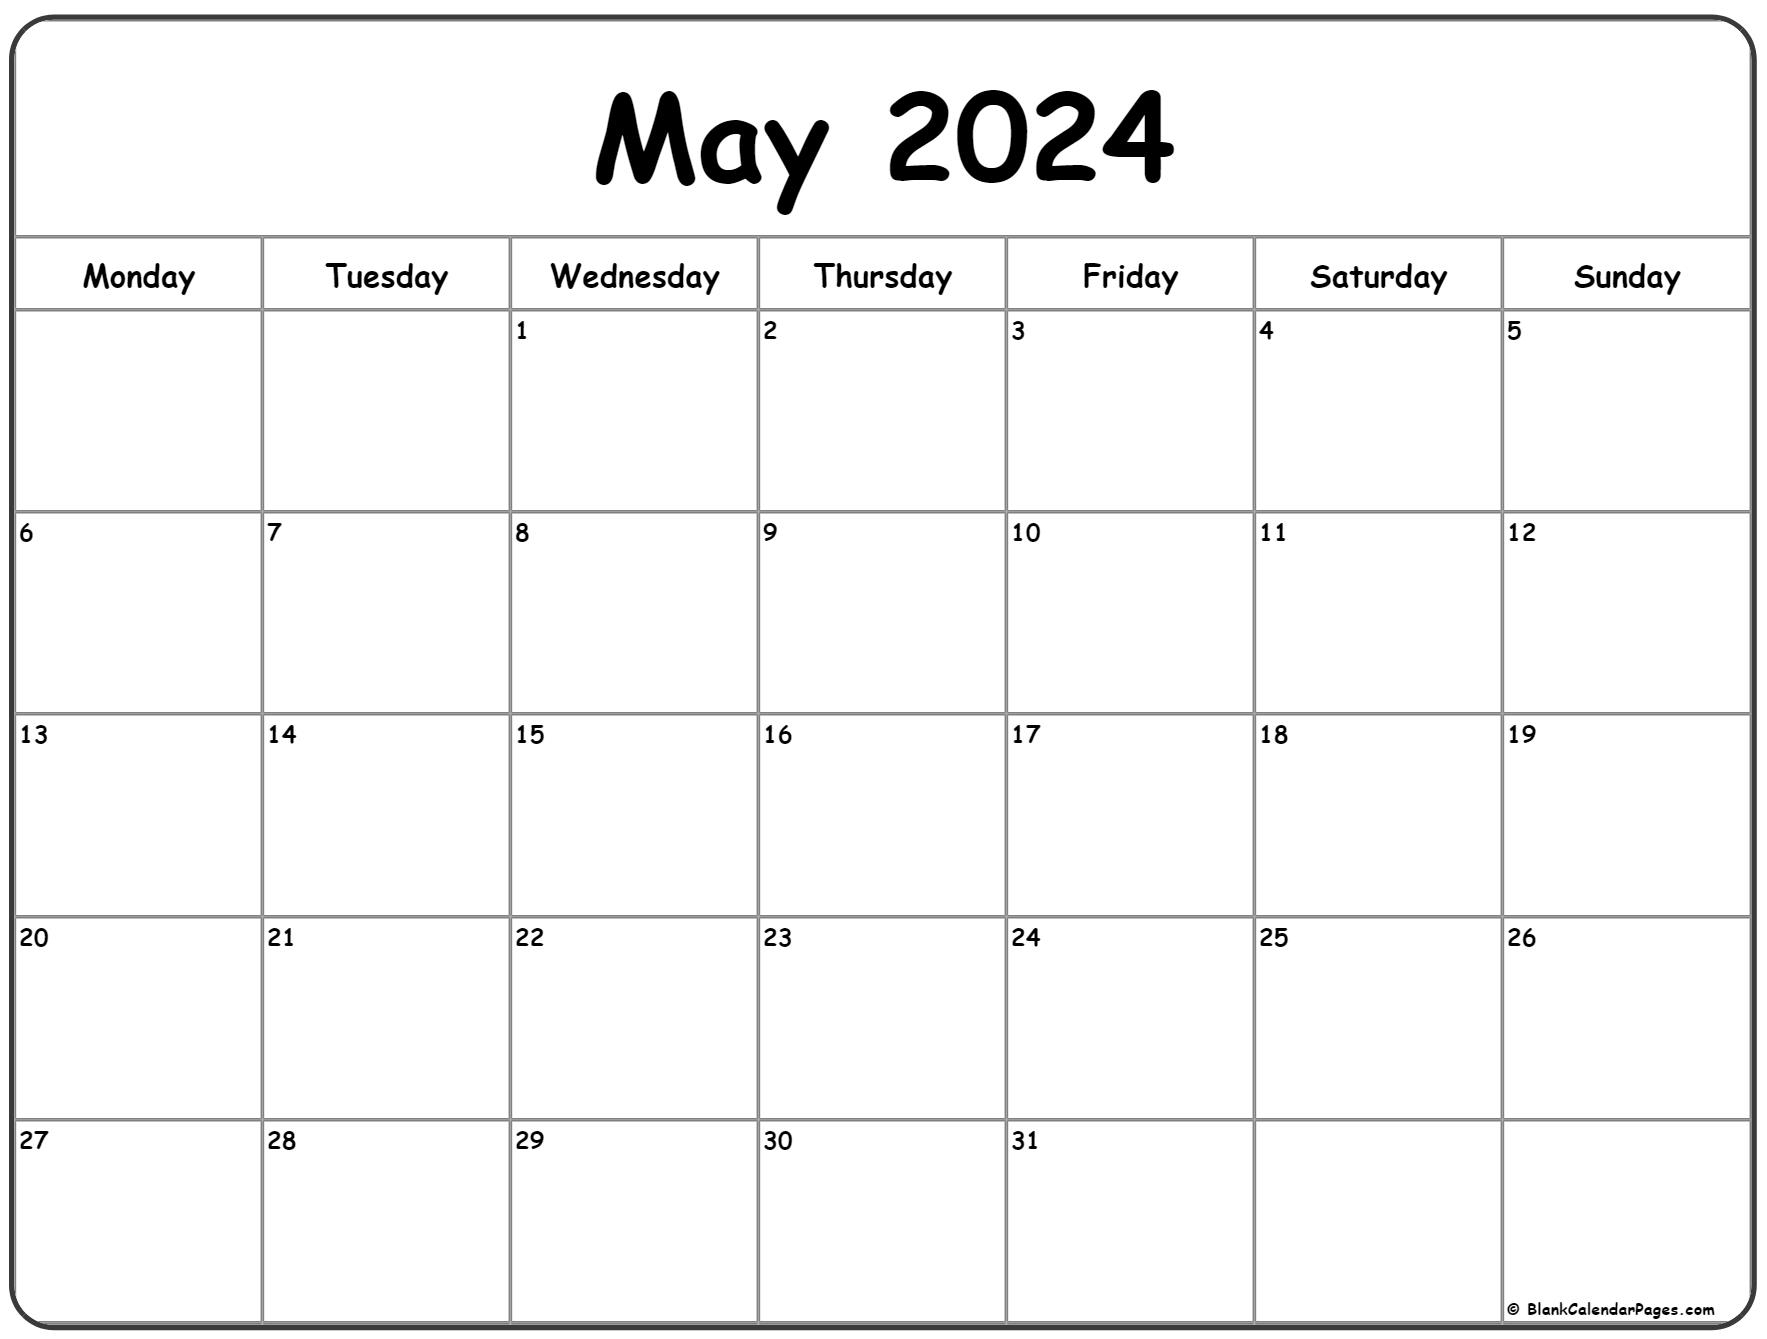 May 2024 Monday Calendar | Monday To Sunday for Blank Monthly Calendar Printable May 2024